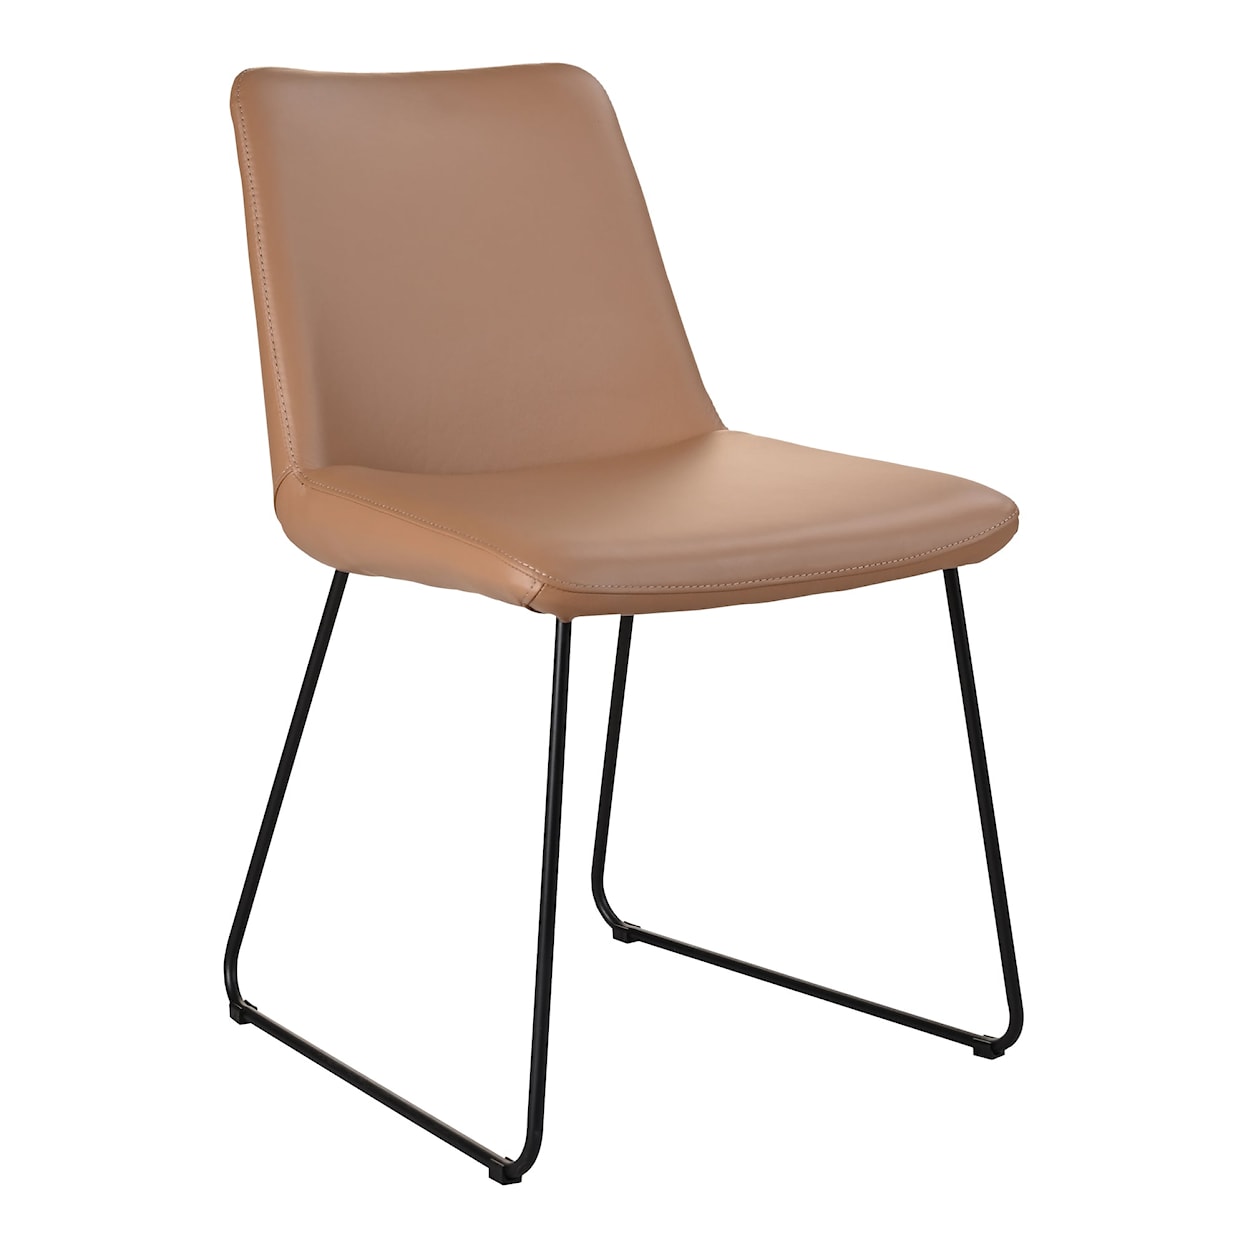 Moe's Home Collection Villa Leather Dining Chair